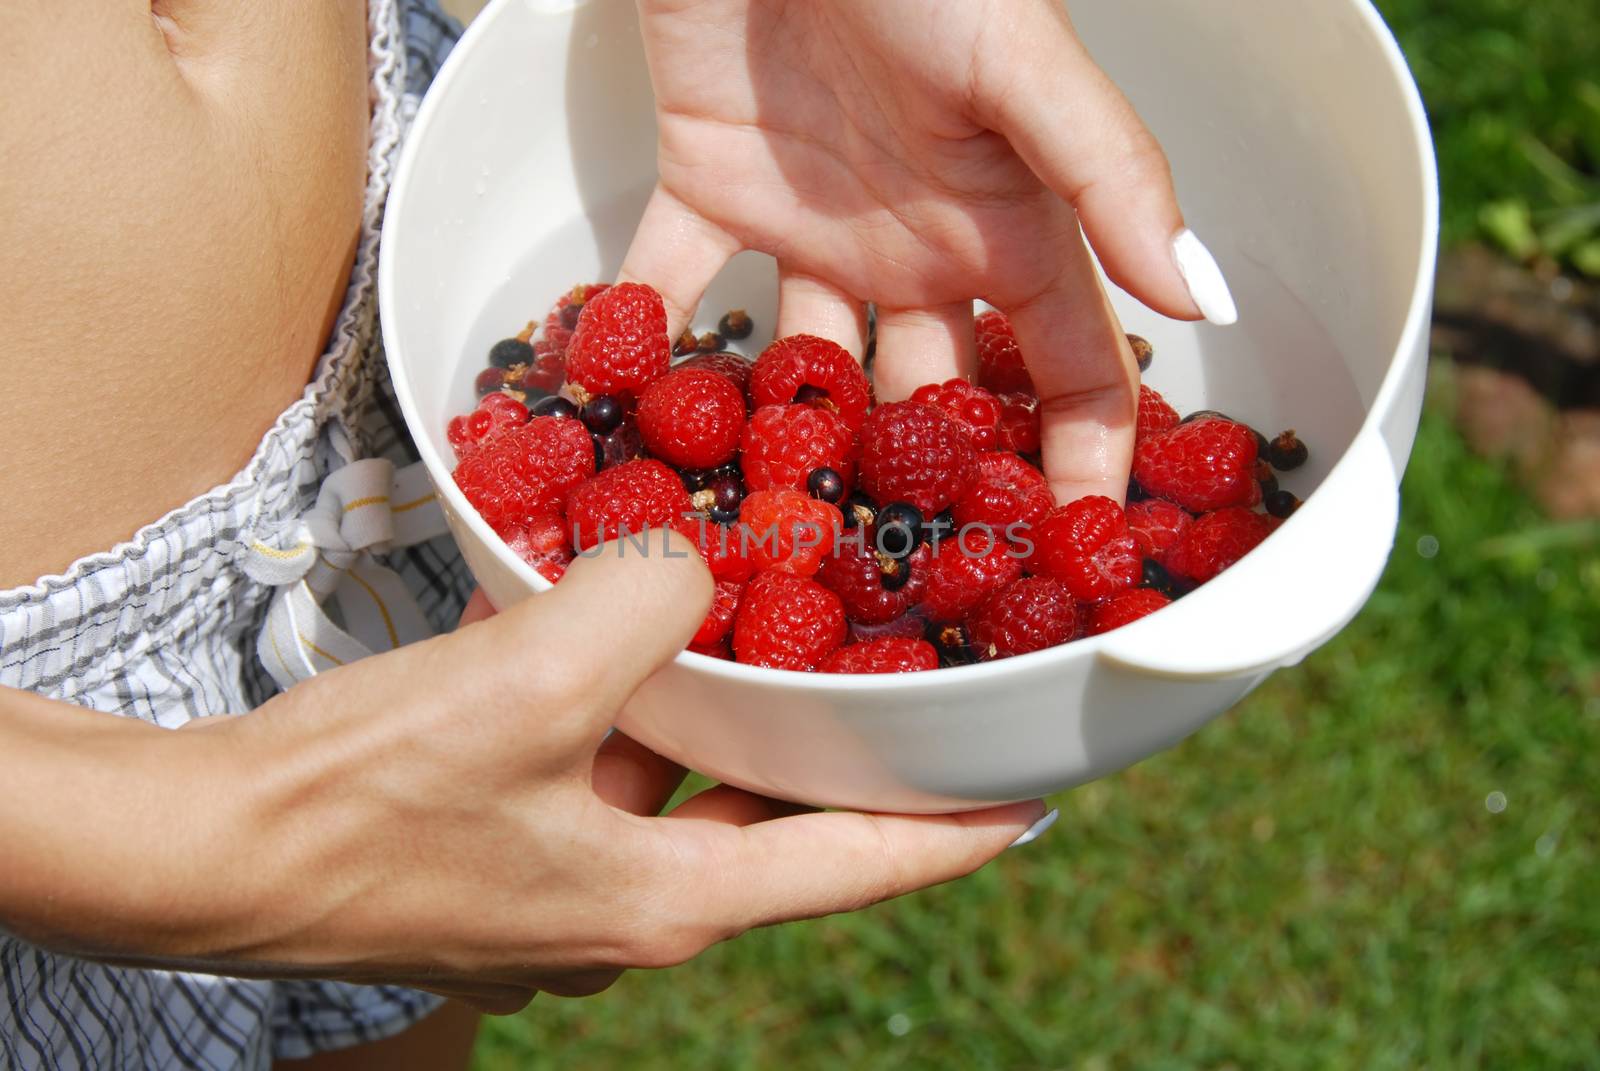 woman hand holding white bowl with raspberries and black currants